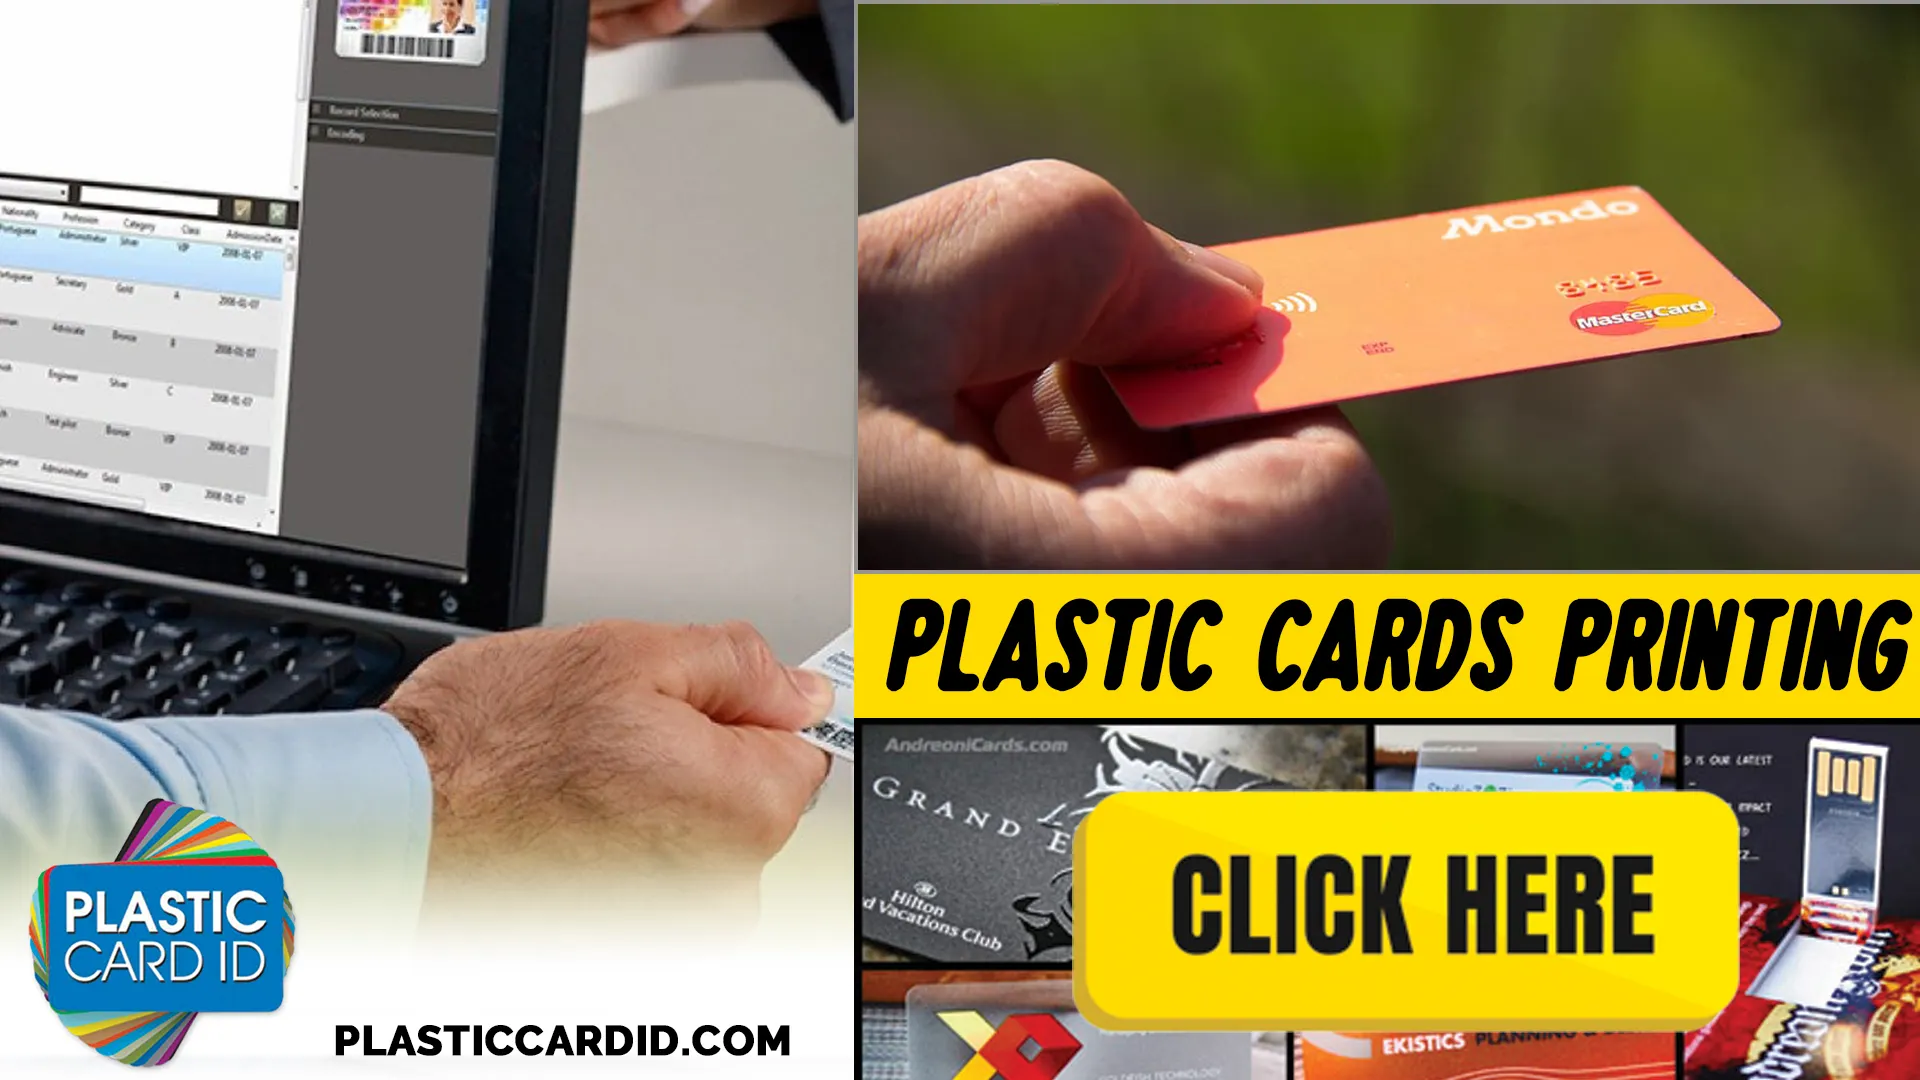 Welcome to the Future of Contactless Card Technology with Plastic Card ID




